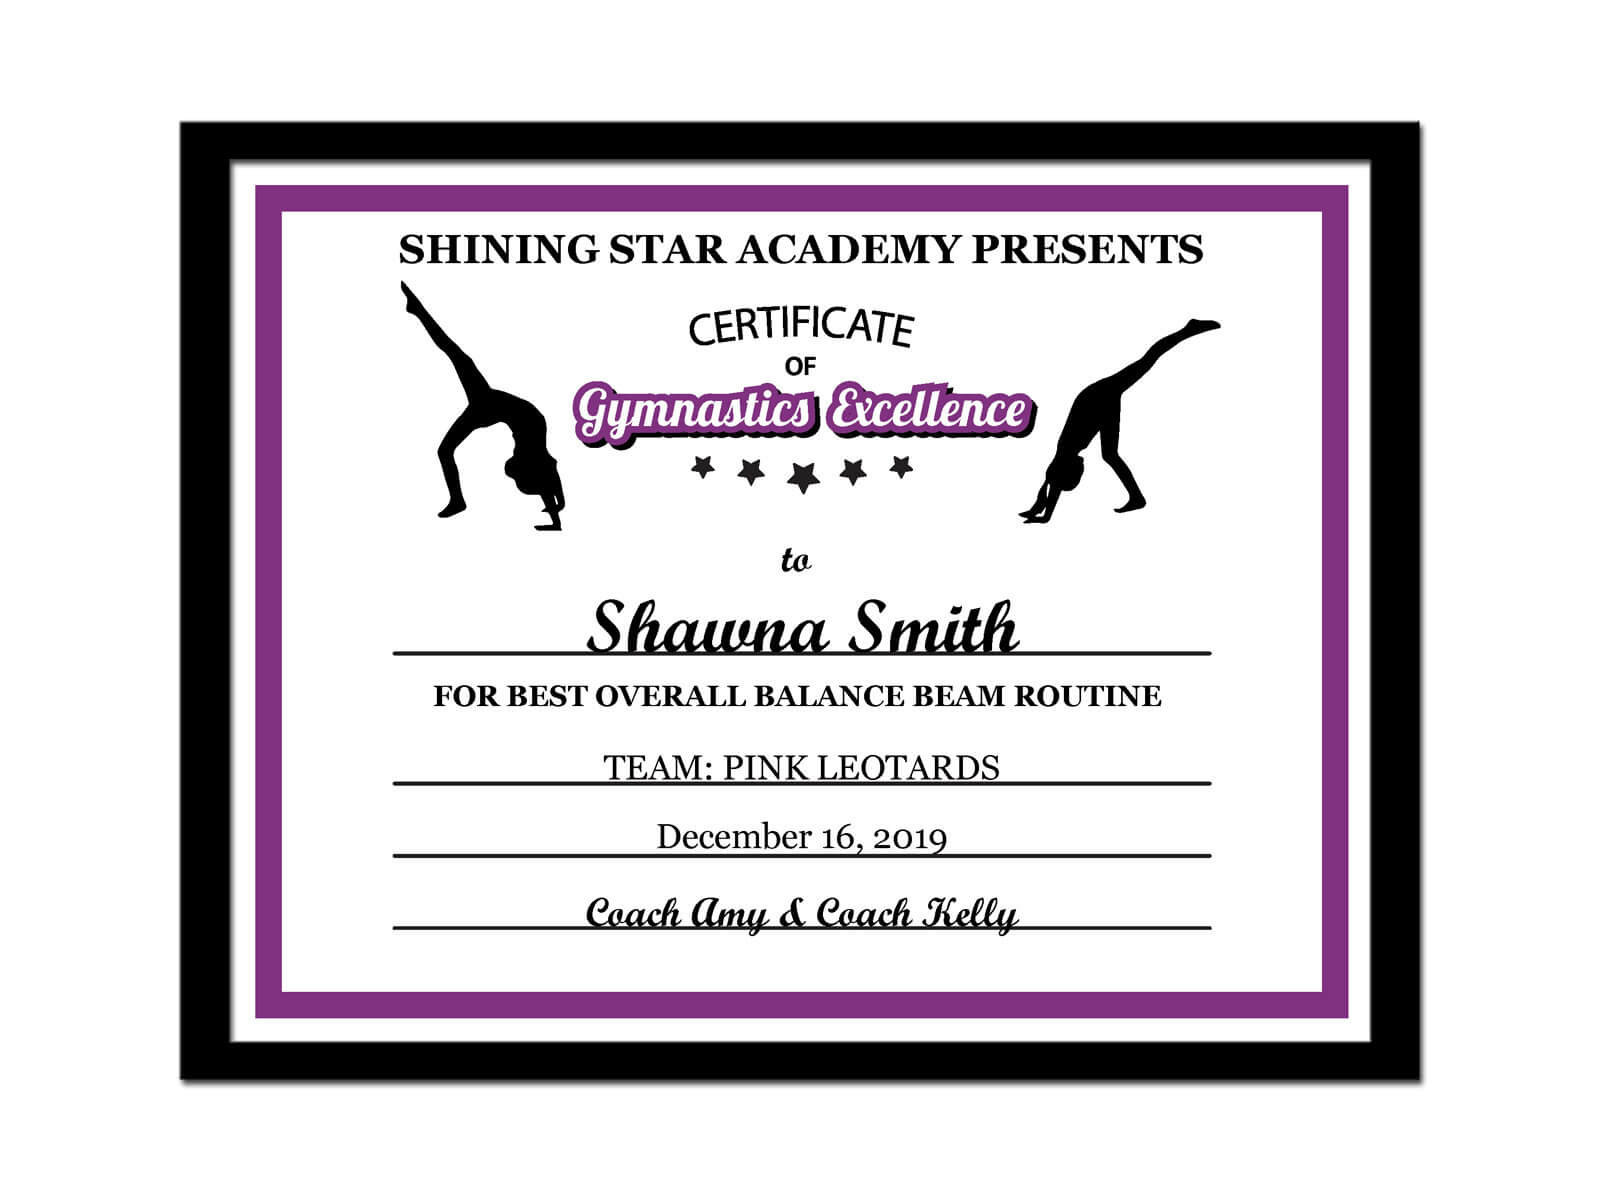 Editable Pdf Sports Team Gymnastics Certificate Award Template In 10 Colors  Letter Size Instant Download Pdf & Blank Jpg Sc 002 Gymnastics Intended For Gymnastics Certificate Template